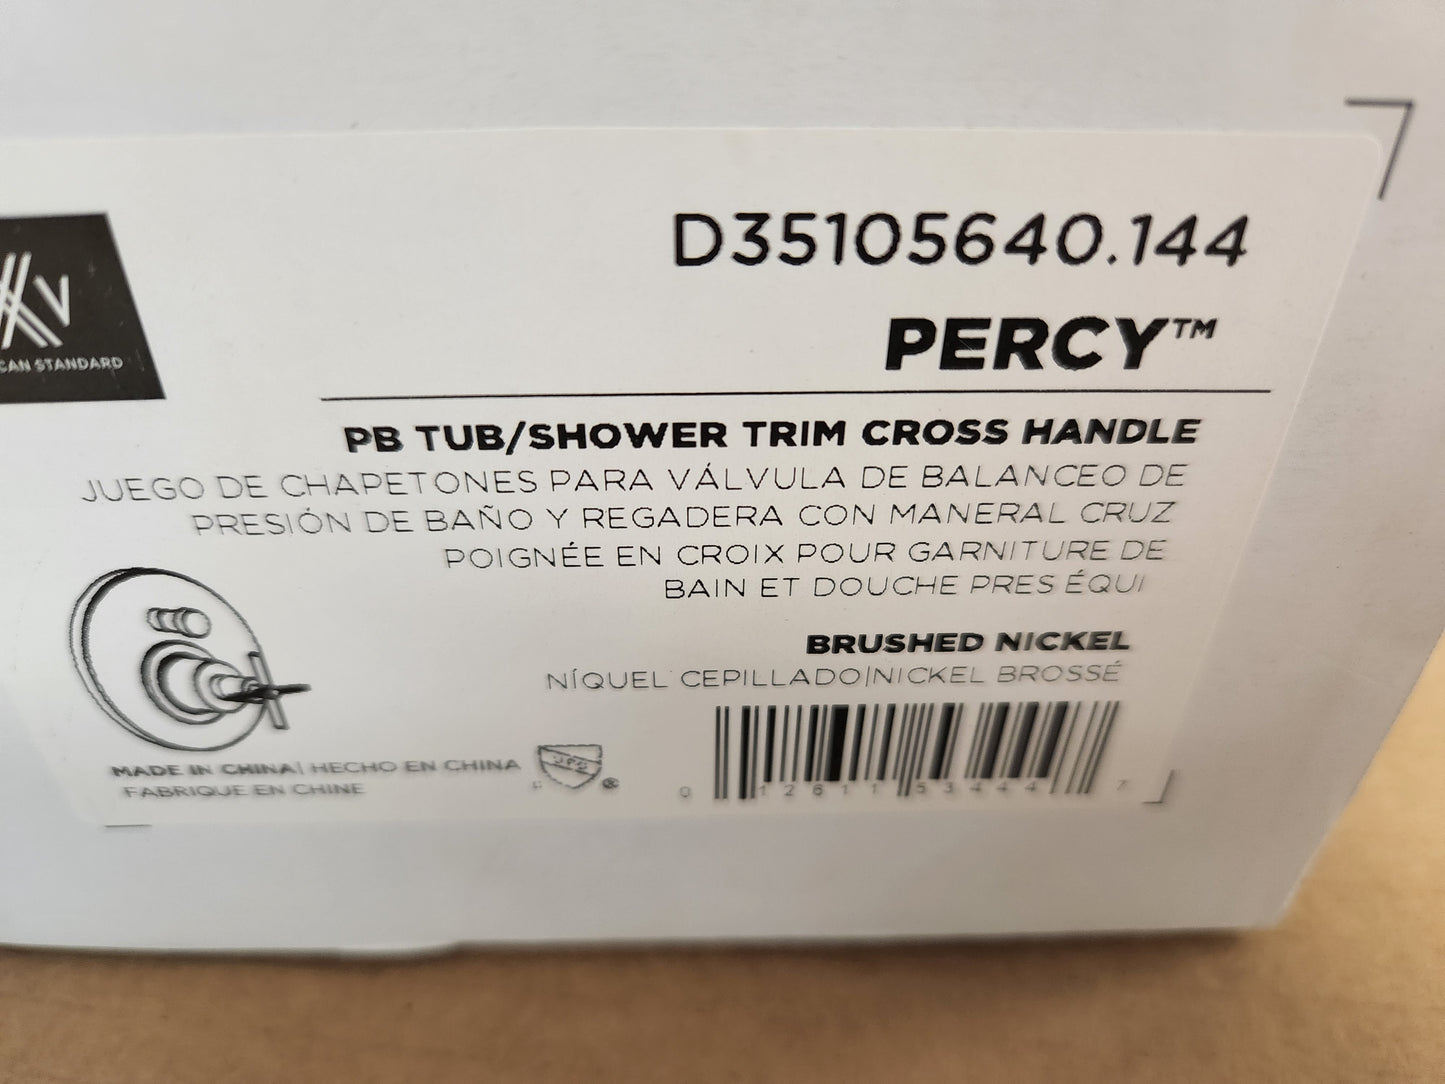 PERCY BRUSHED NICKEL PRESSURE BALANCE TUB/SHOWER VALVE TRIM WITH CROSS HANDLE